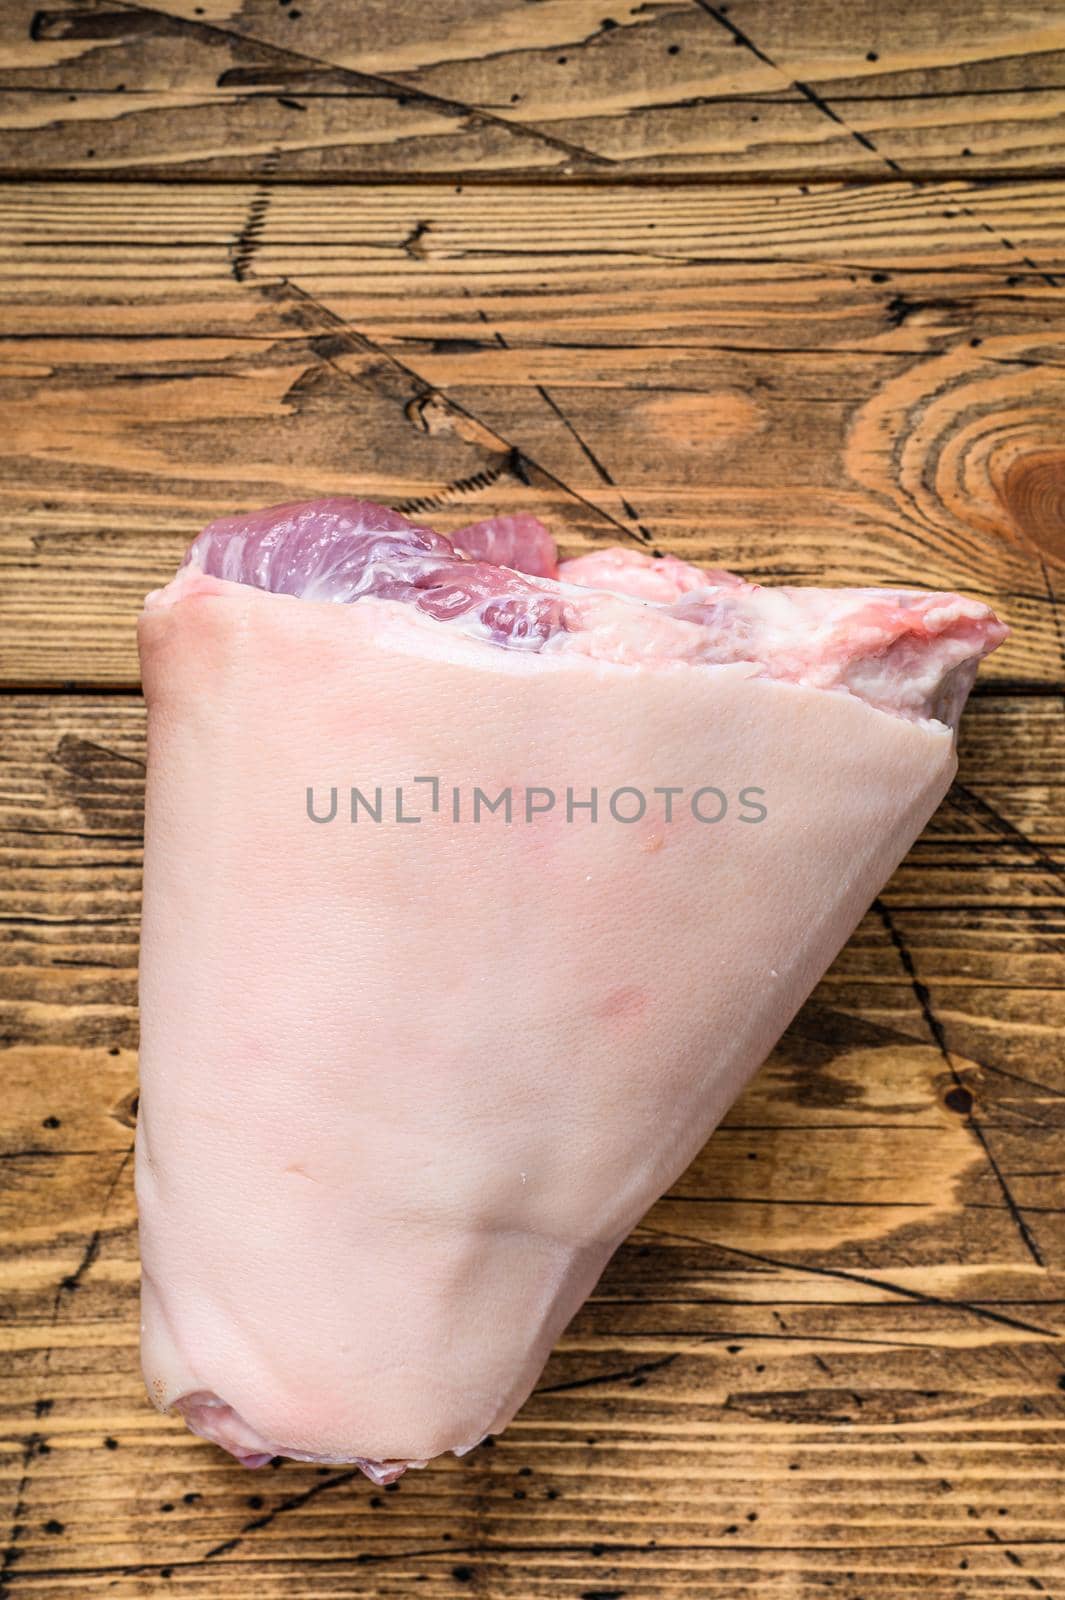 Raw pork knuckle meat on a kitchen table. Wooden background. Top view.